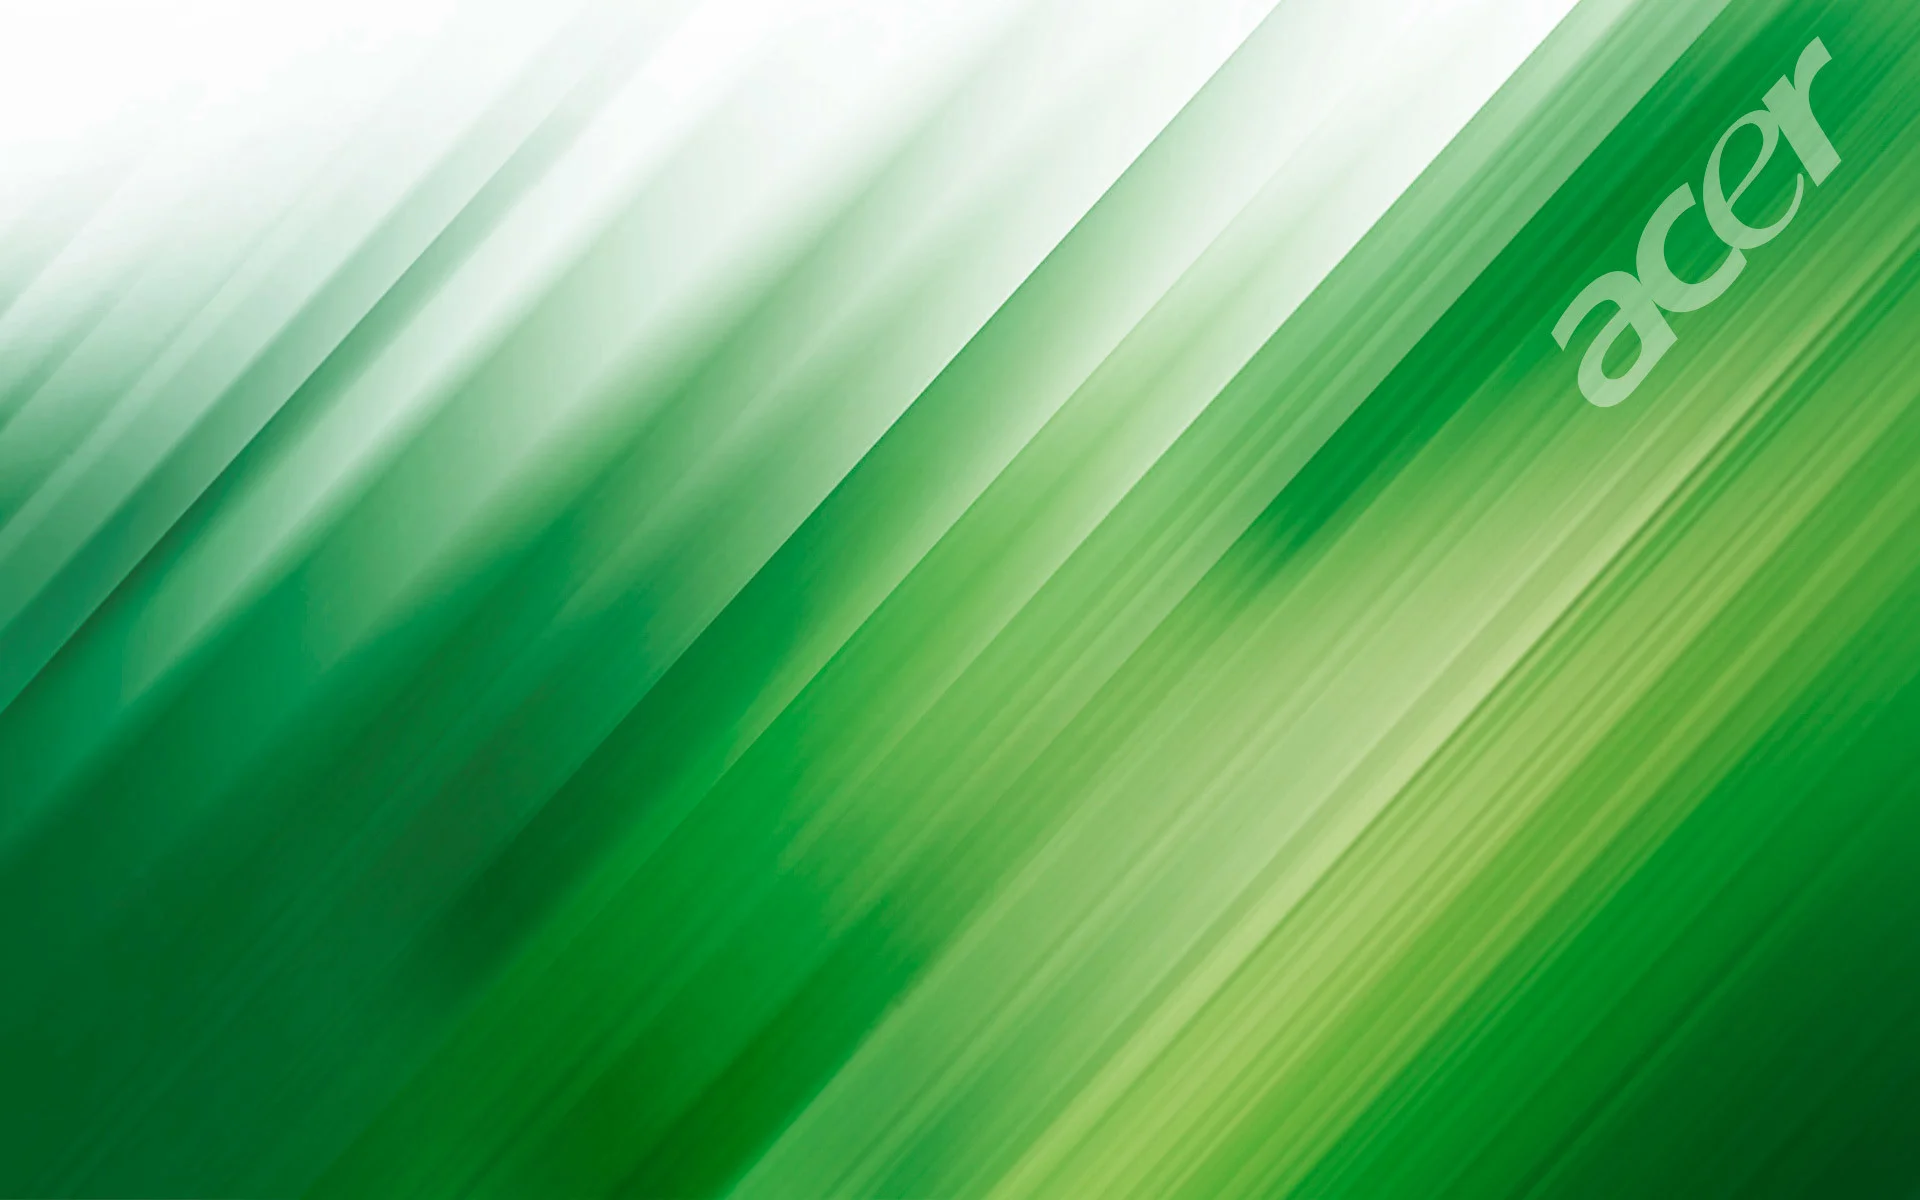 Acer FHD Wallpapers on WallpaperDog